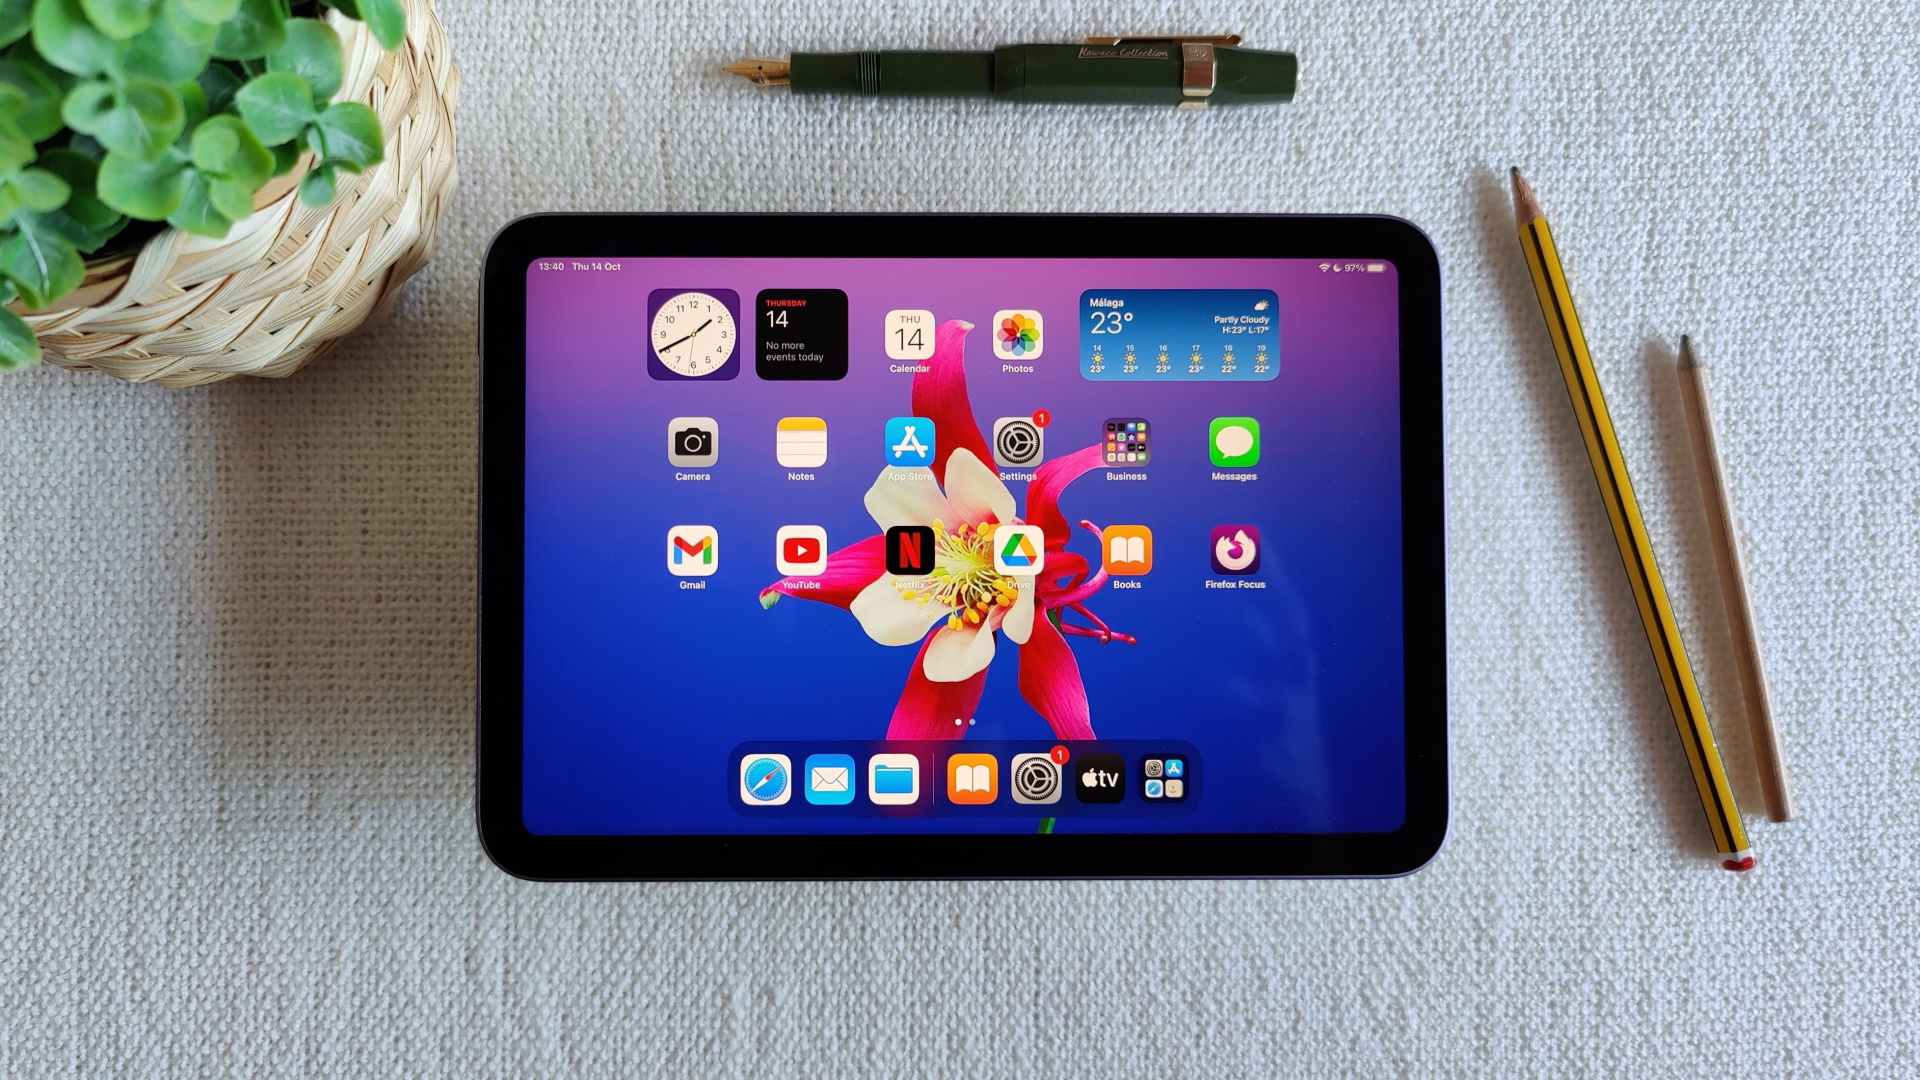 Online Marketplace in Looking For Used Ipads